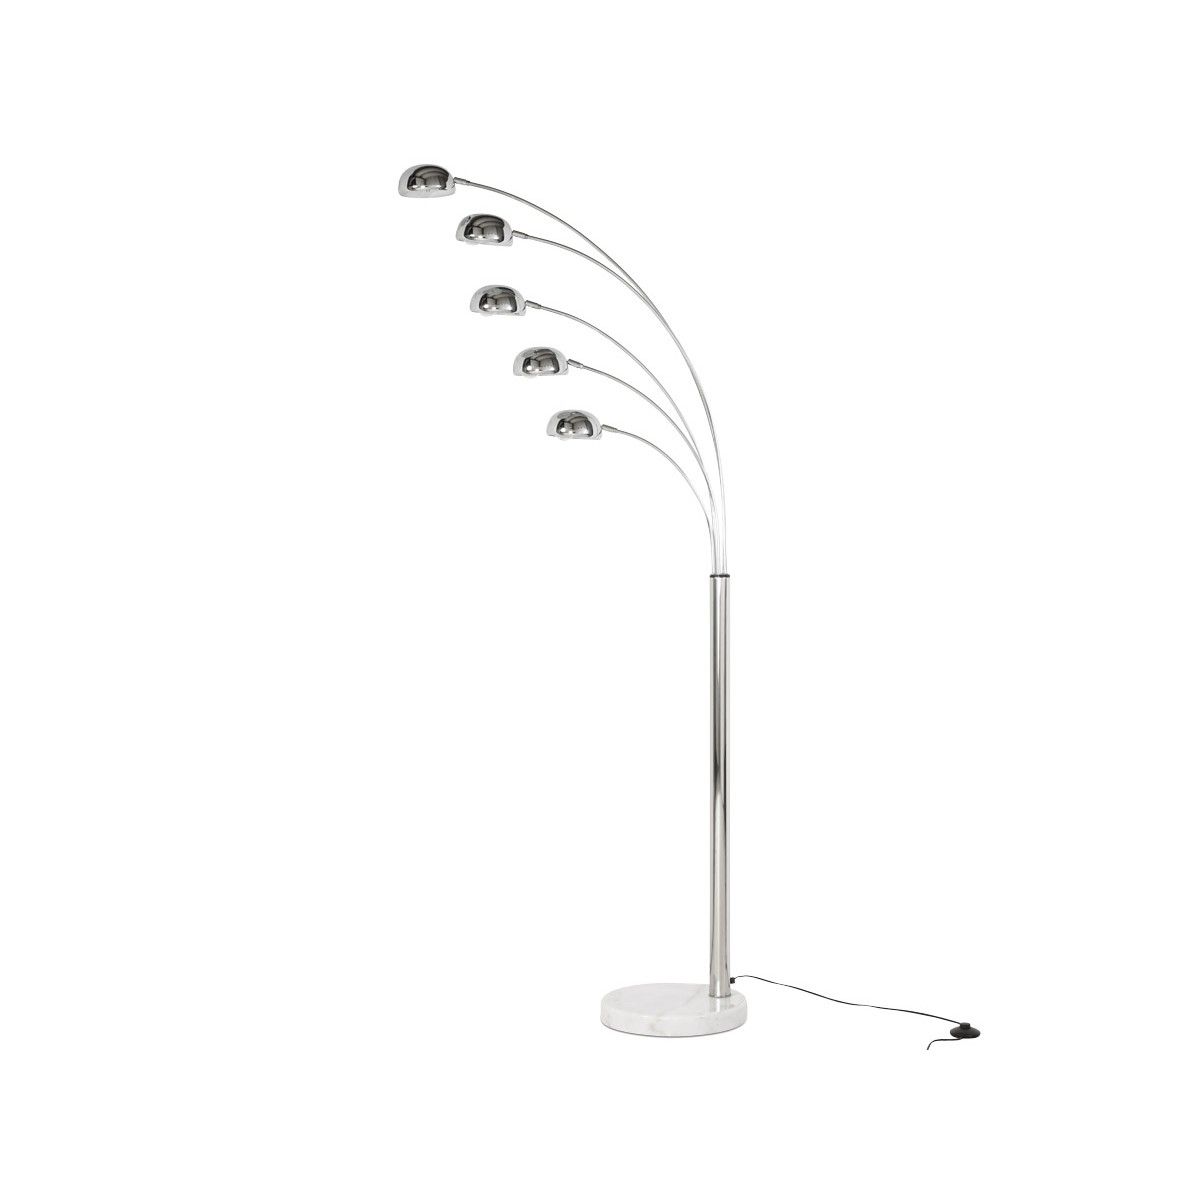 Rollier Design Floor Lamp 5 Shades Chrome Steel (chrome) Pertaining To 5 Light Arc Floor Lamps (View 13 of 20)